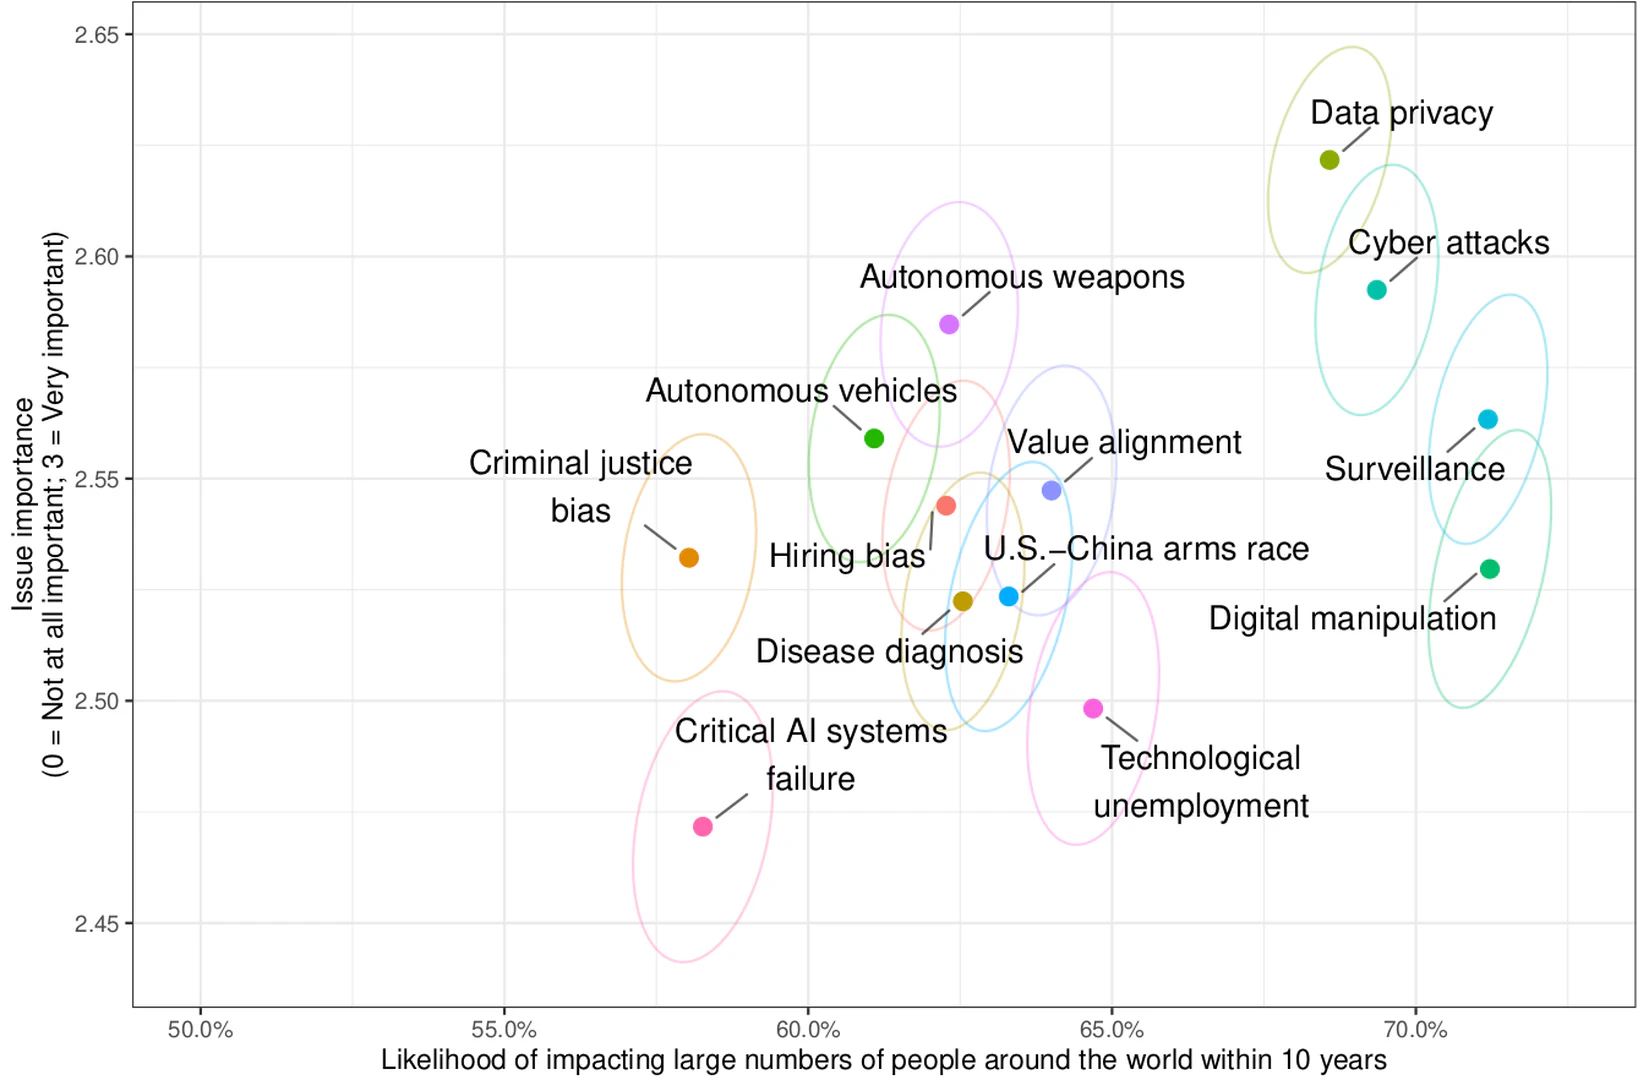 Perceptions of AI governance challenges in the U.S. and around the world